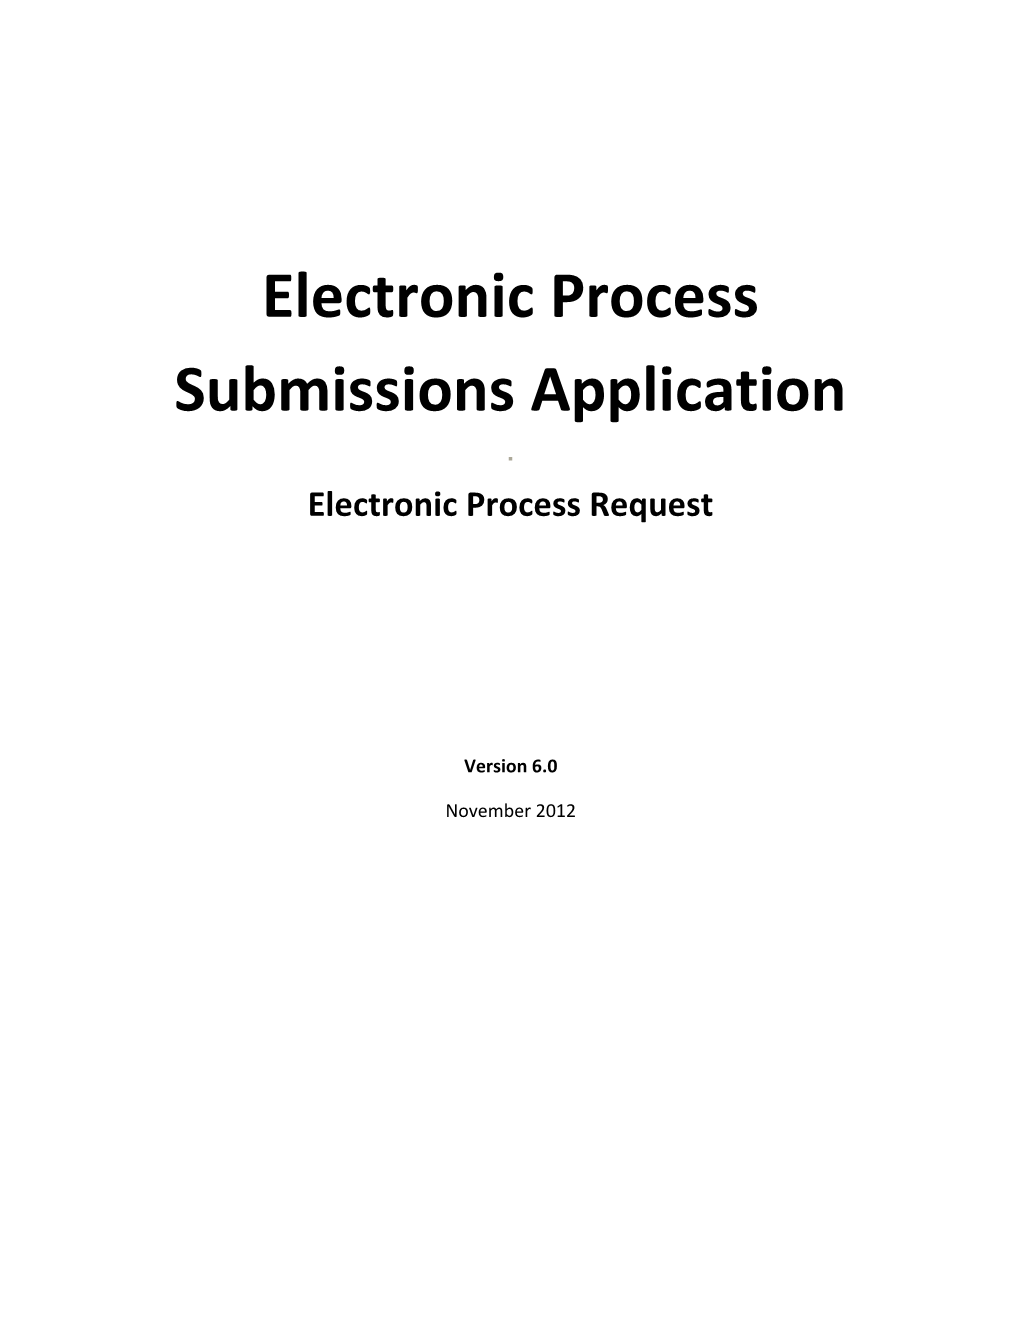 Electronic Process Submissions Application